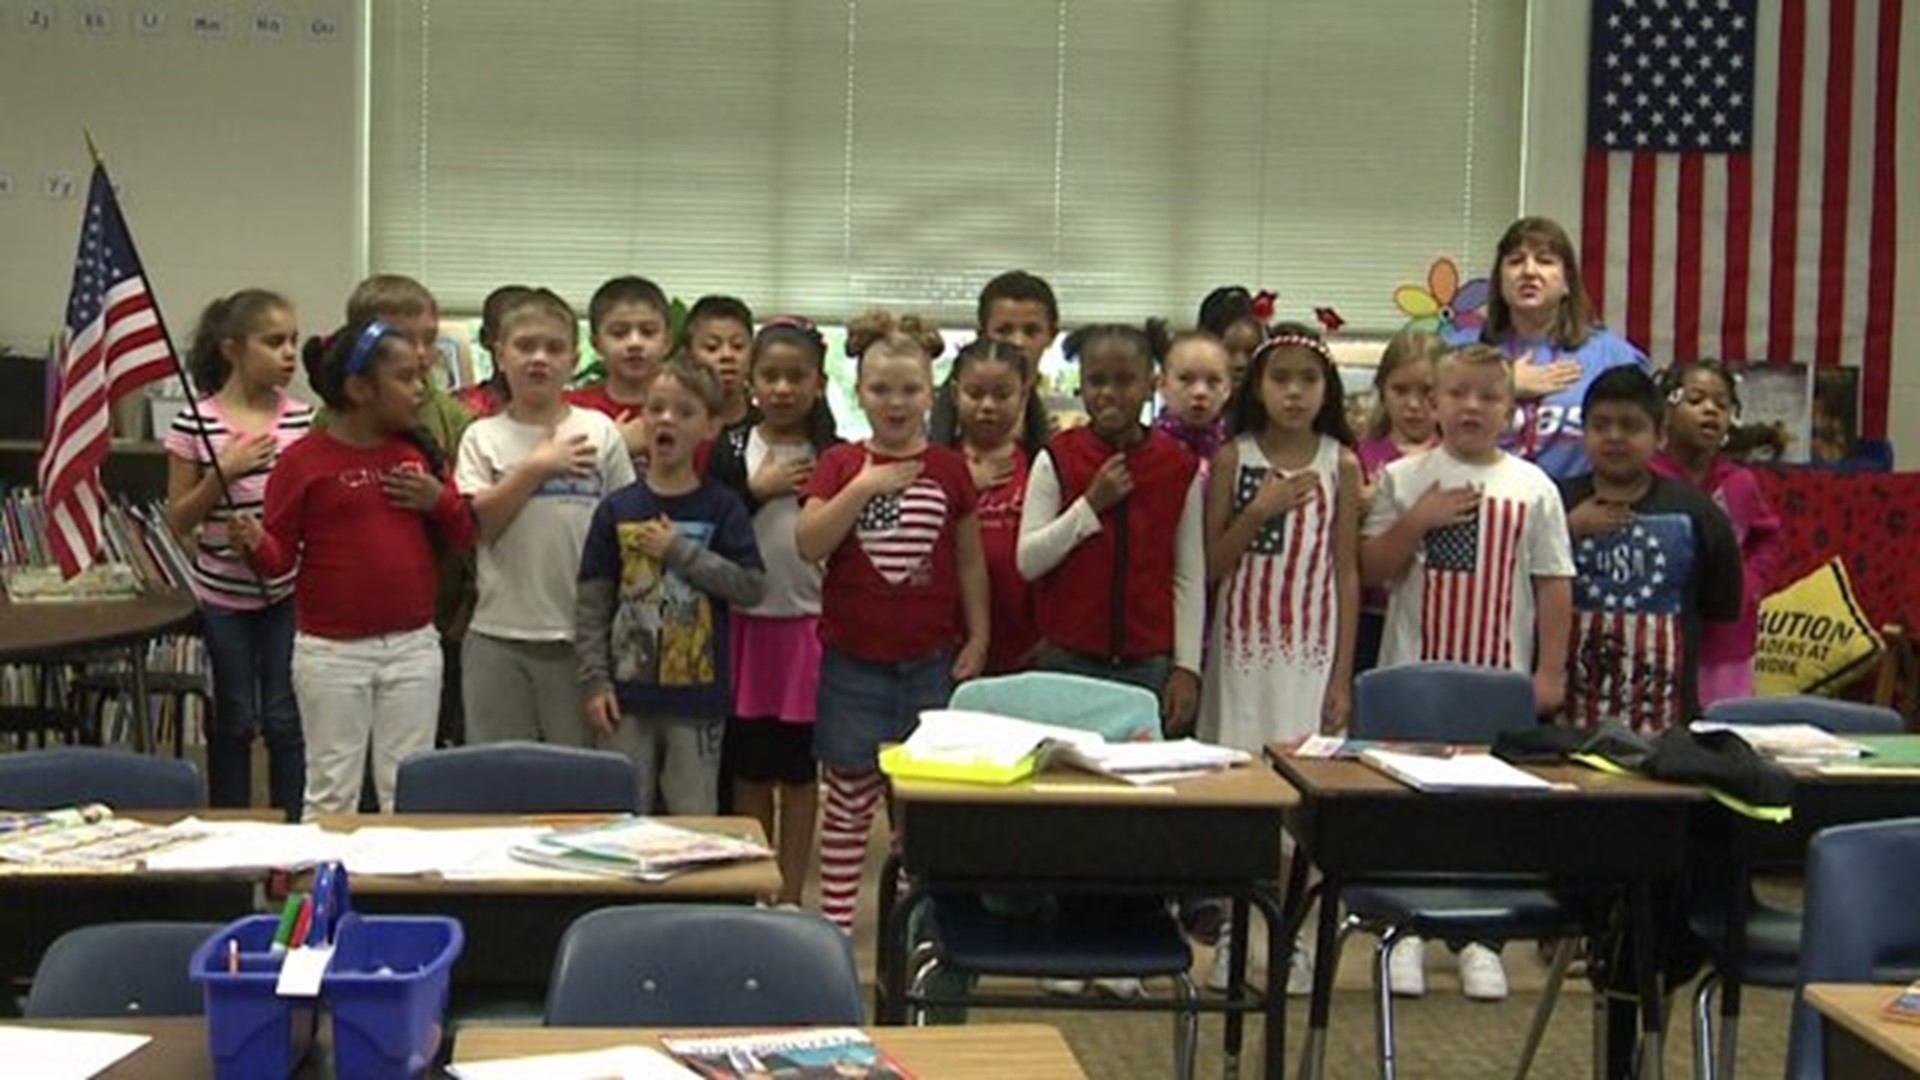 The Pledge from Mrs. Keck`s class at Longfellow Liberal Arts School